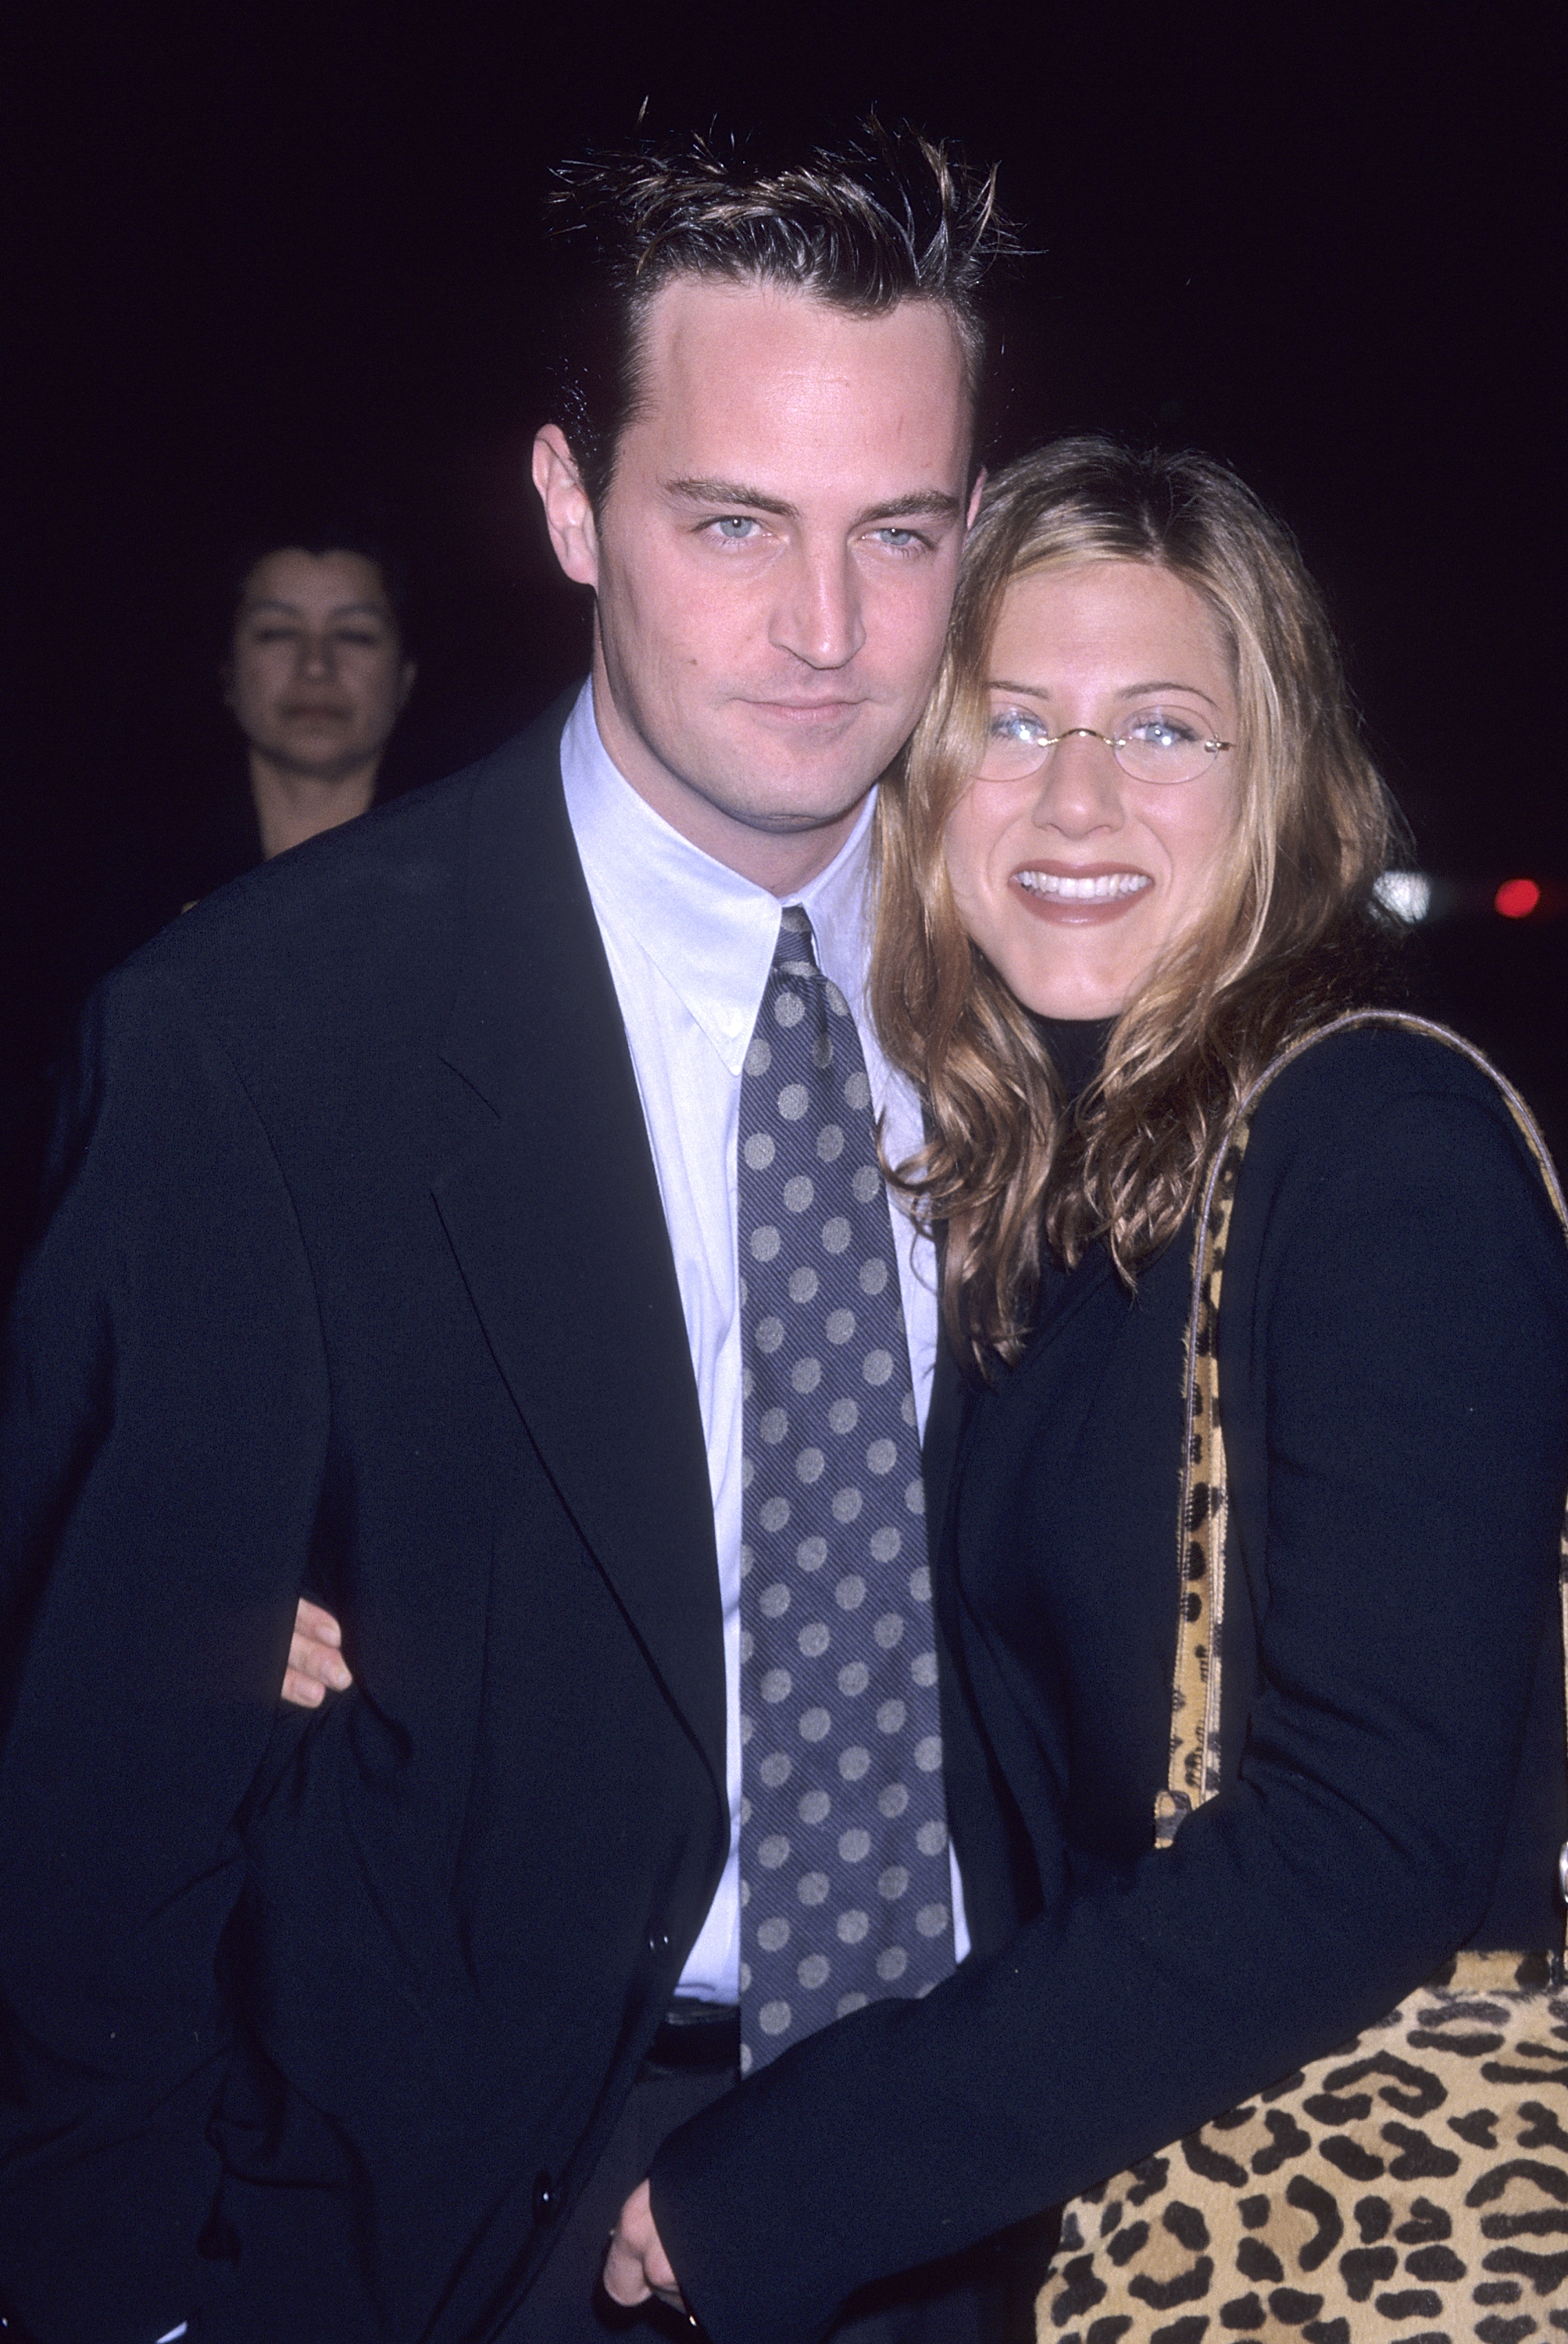 Matthew Perry and Jennifer Aniston at the "Kissing a Fool" premiere on February 18, 1998 in Westwood, California | Source: Getty Images